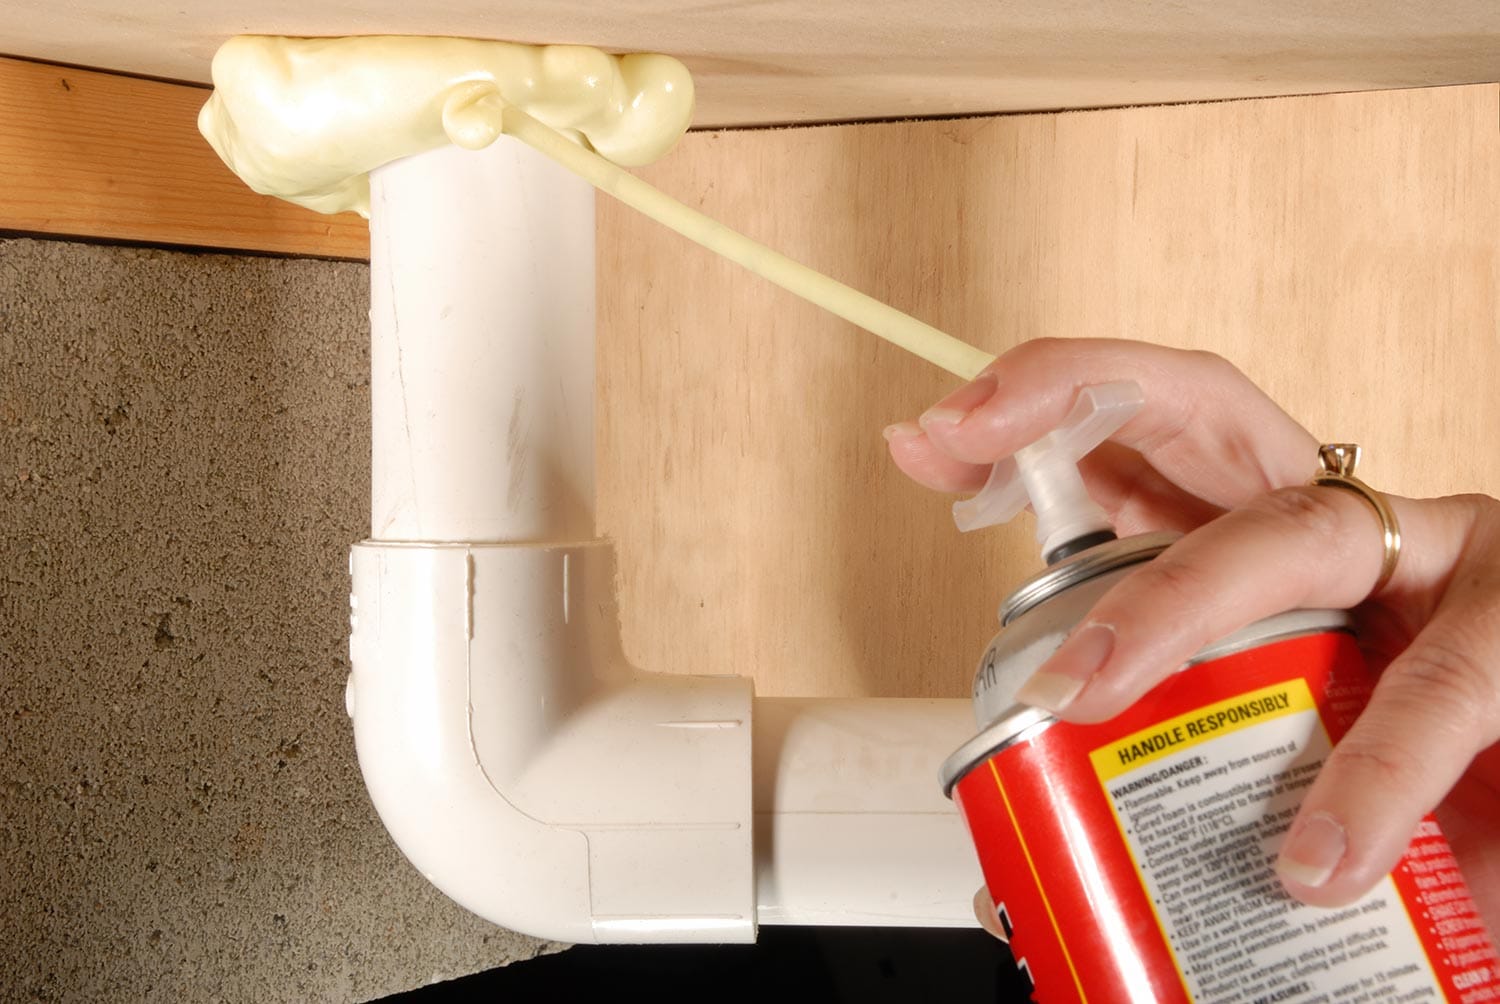 Sealing the air leaks around plumbing penetrations underneath a home with an insulating expandable foam sealant.